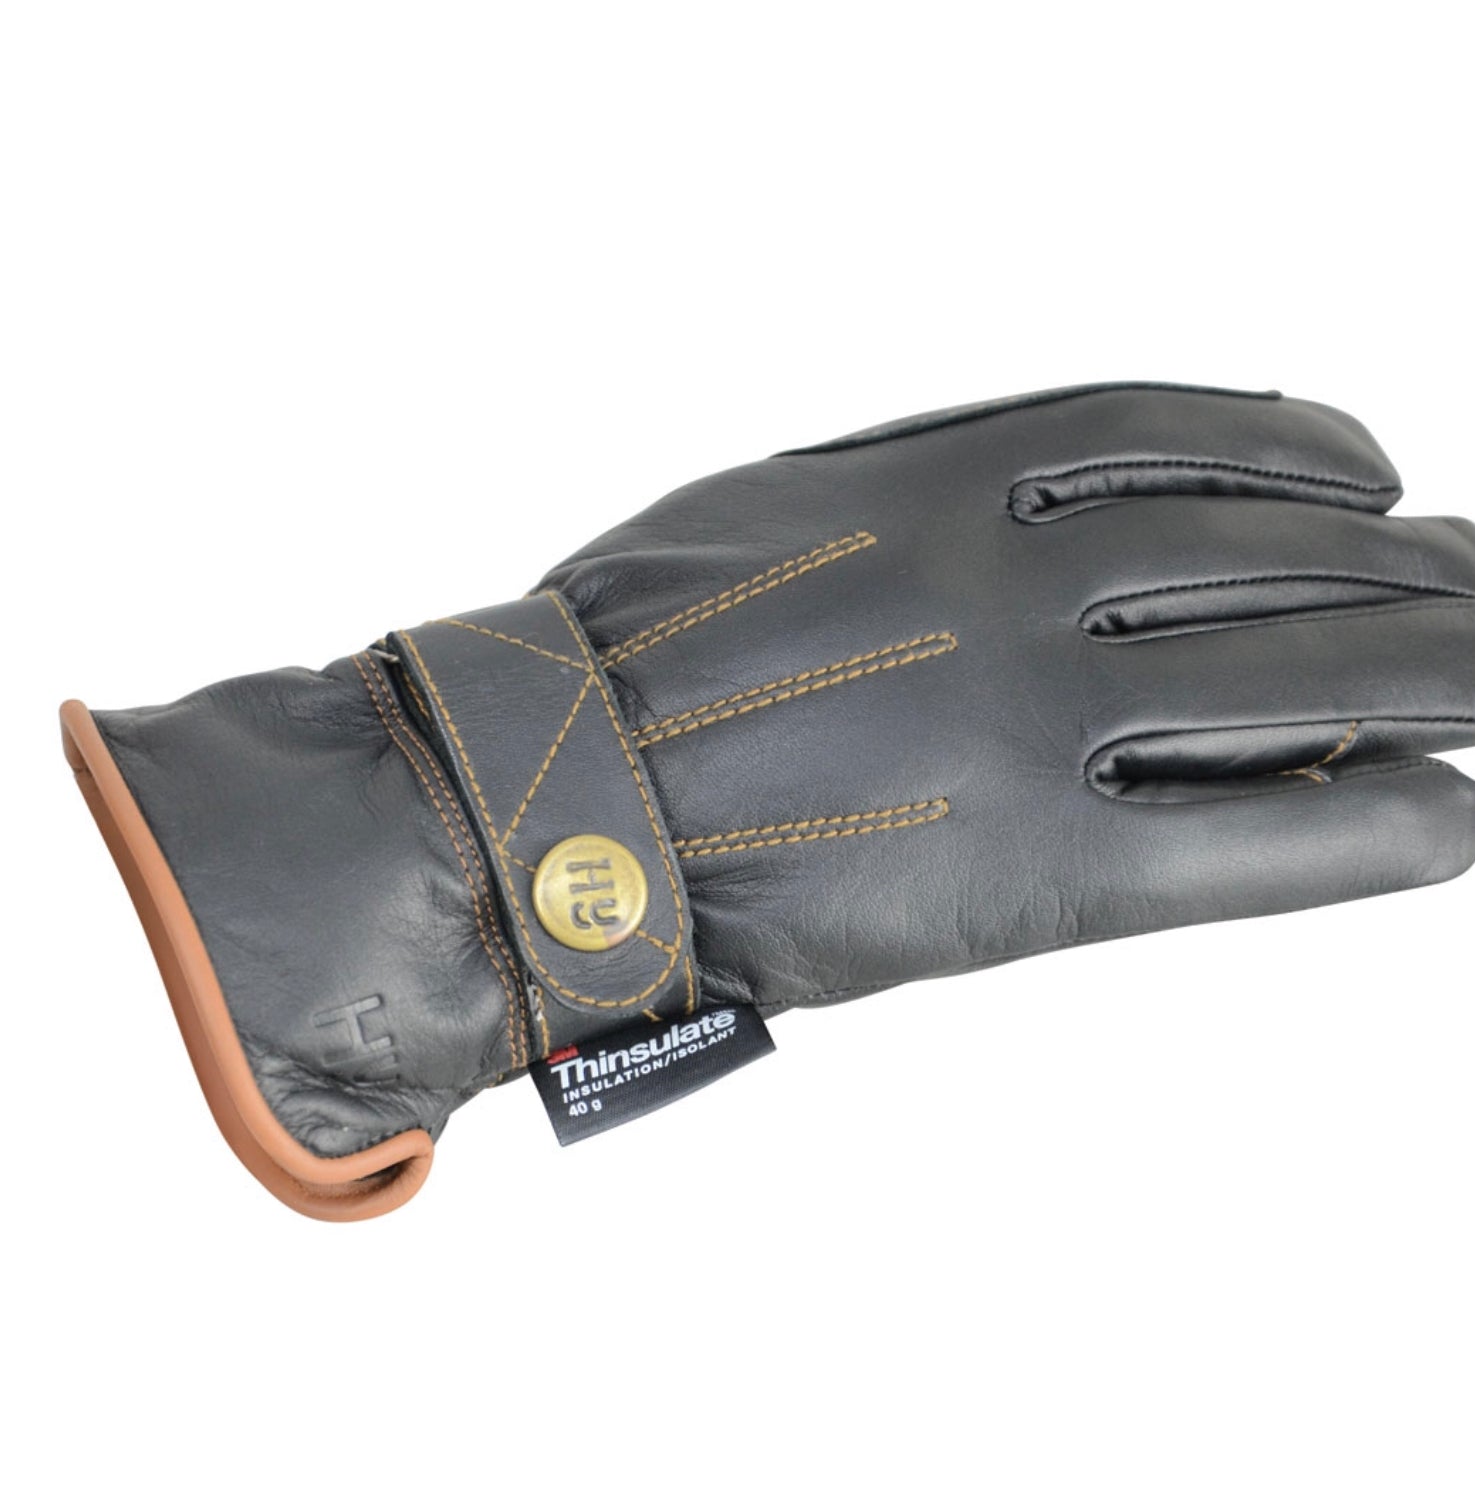 HY5 Thinsulate Leather Winter Riding Gloves